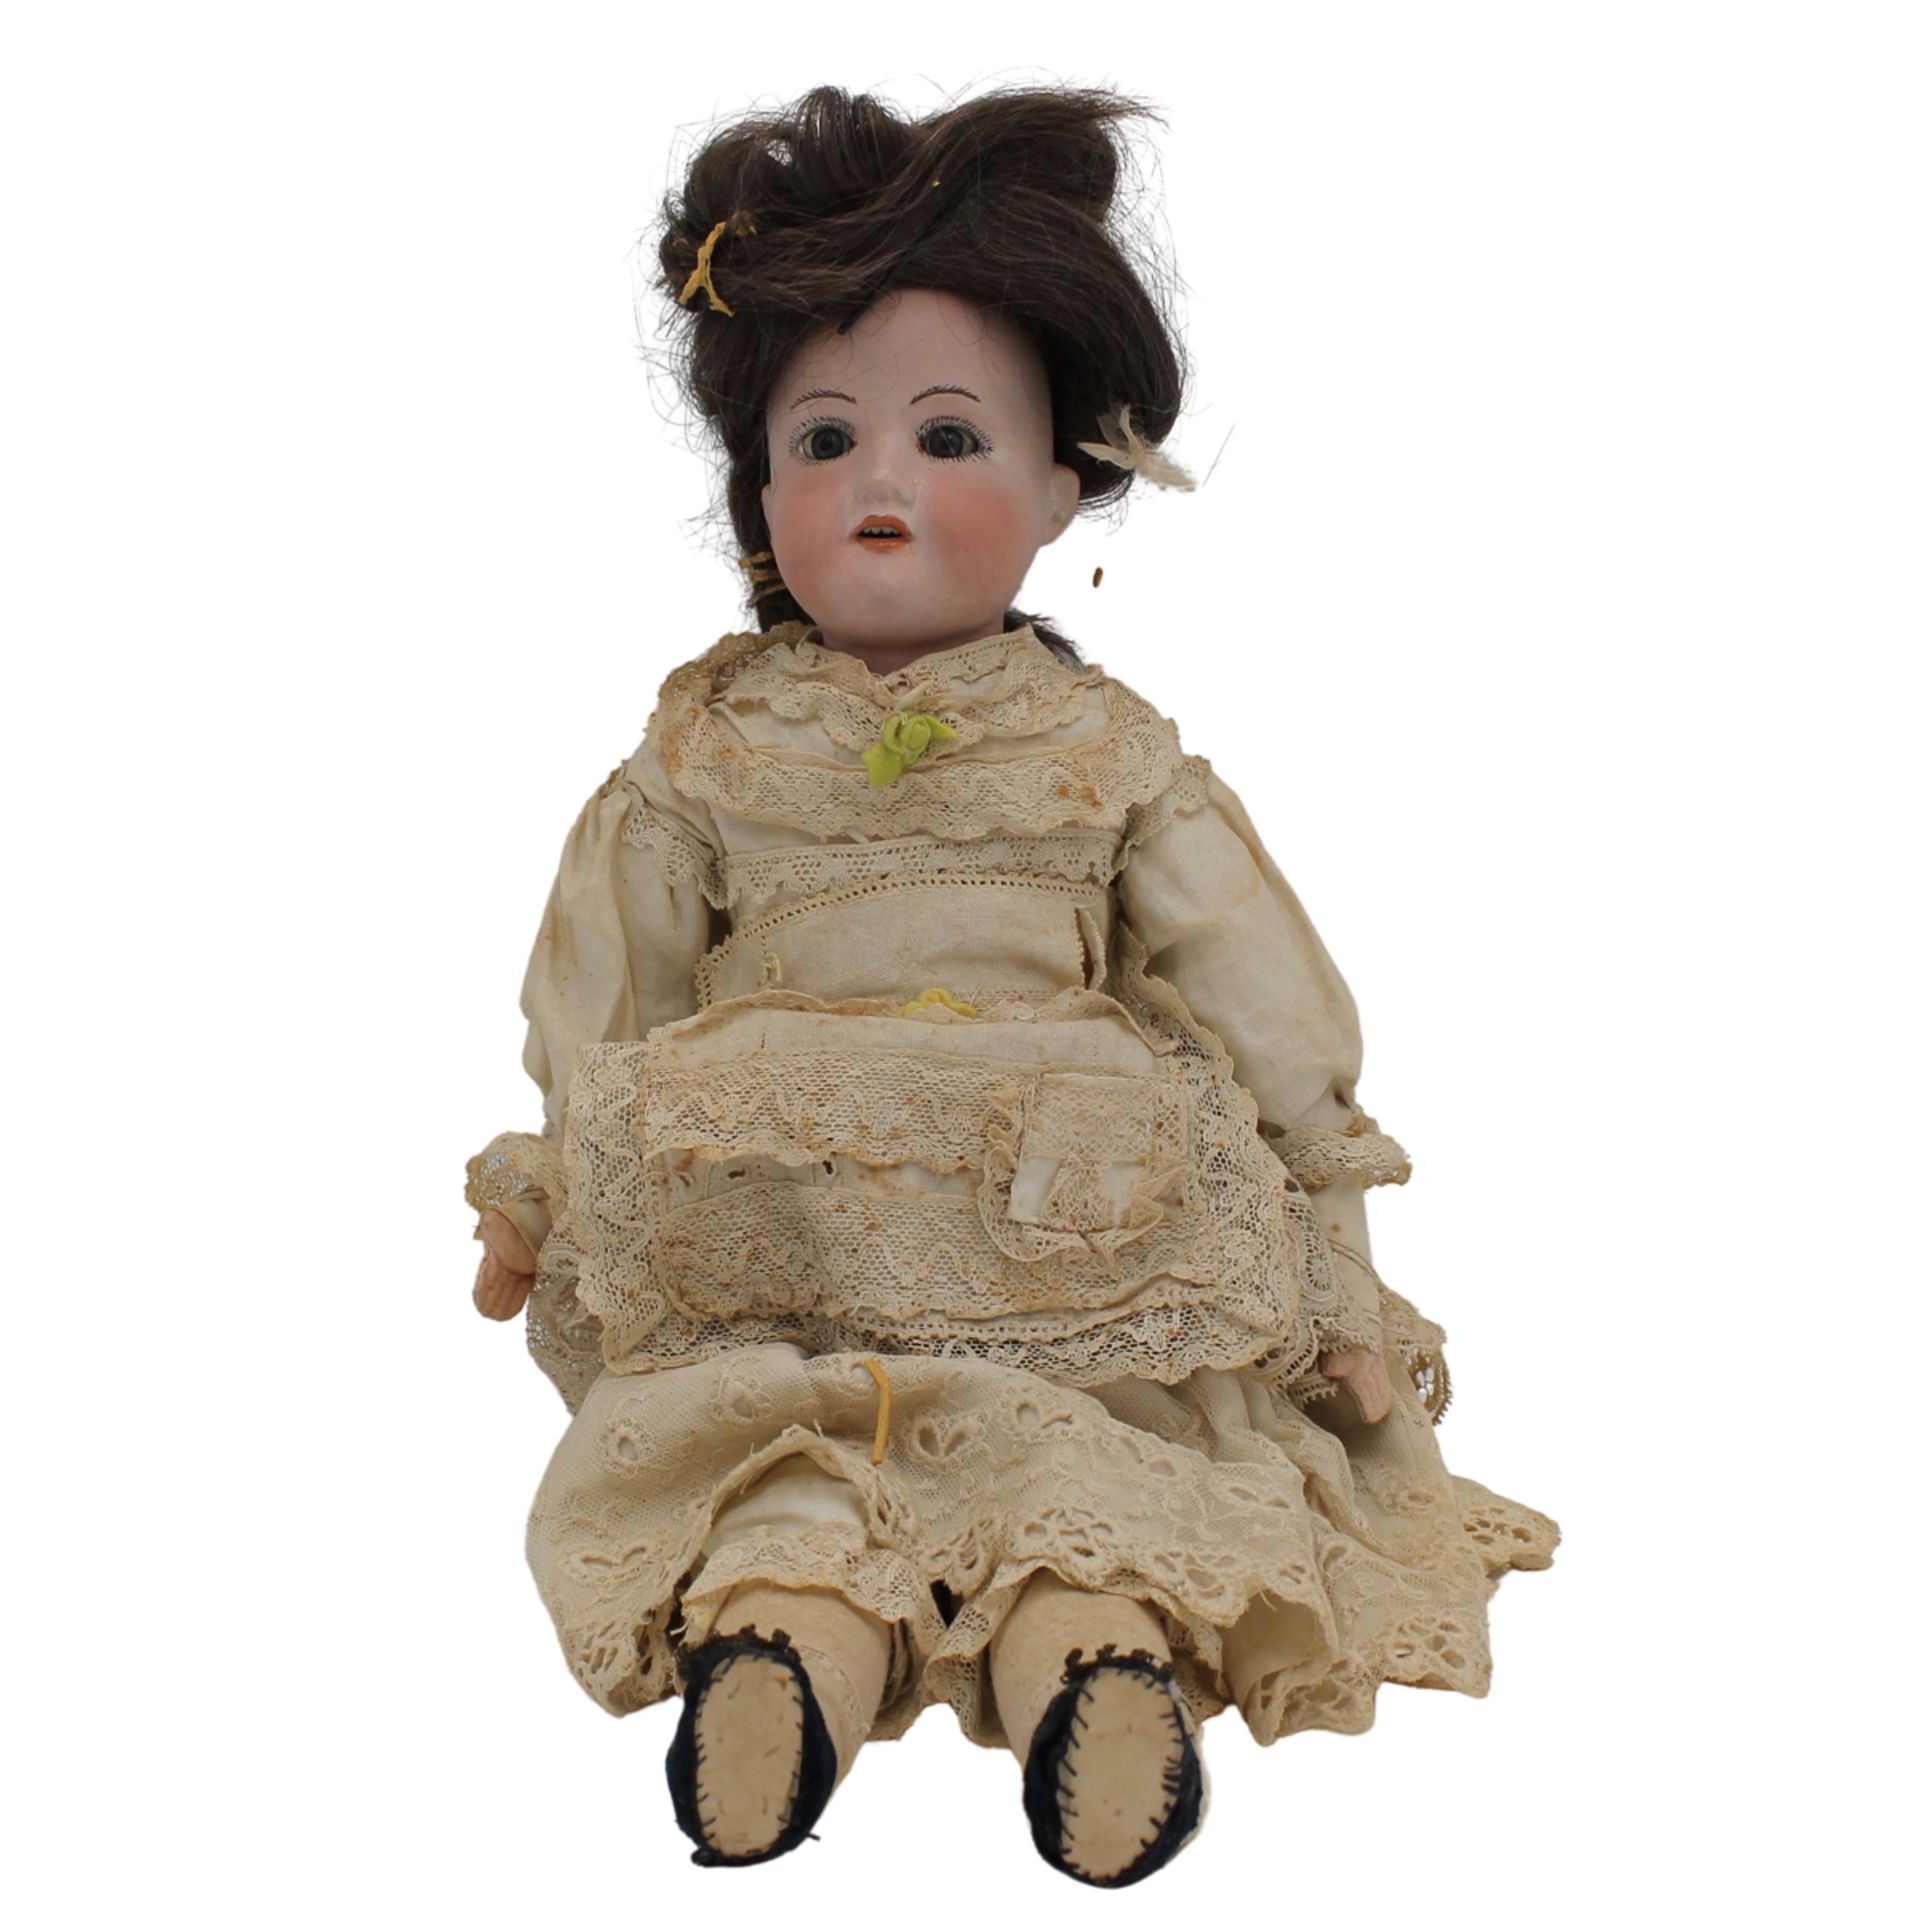 BAMBOLA CON VOLTO IN BISQUIT - DOLL WITH FACE IN BISQUIT